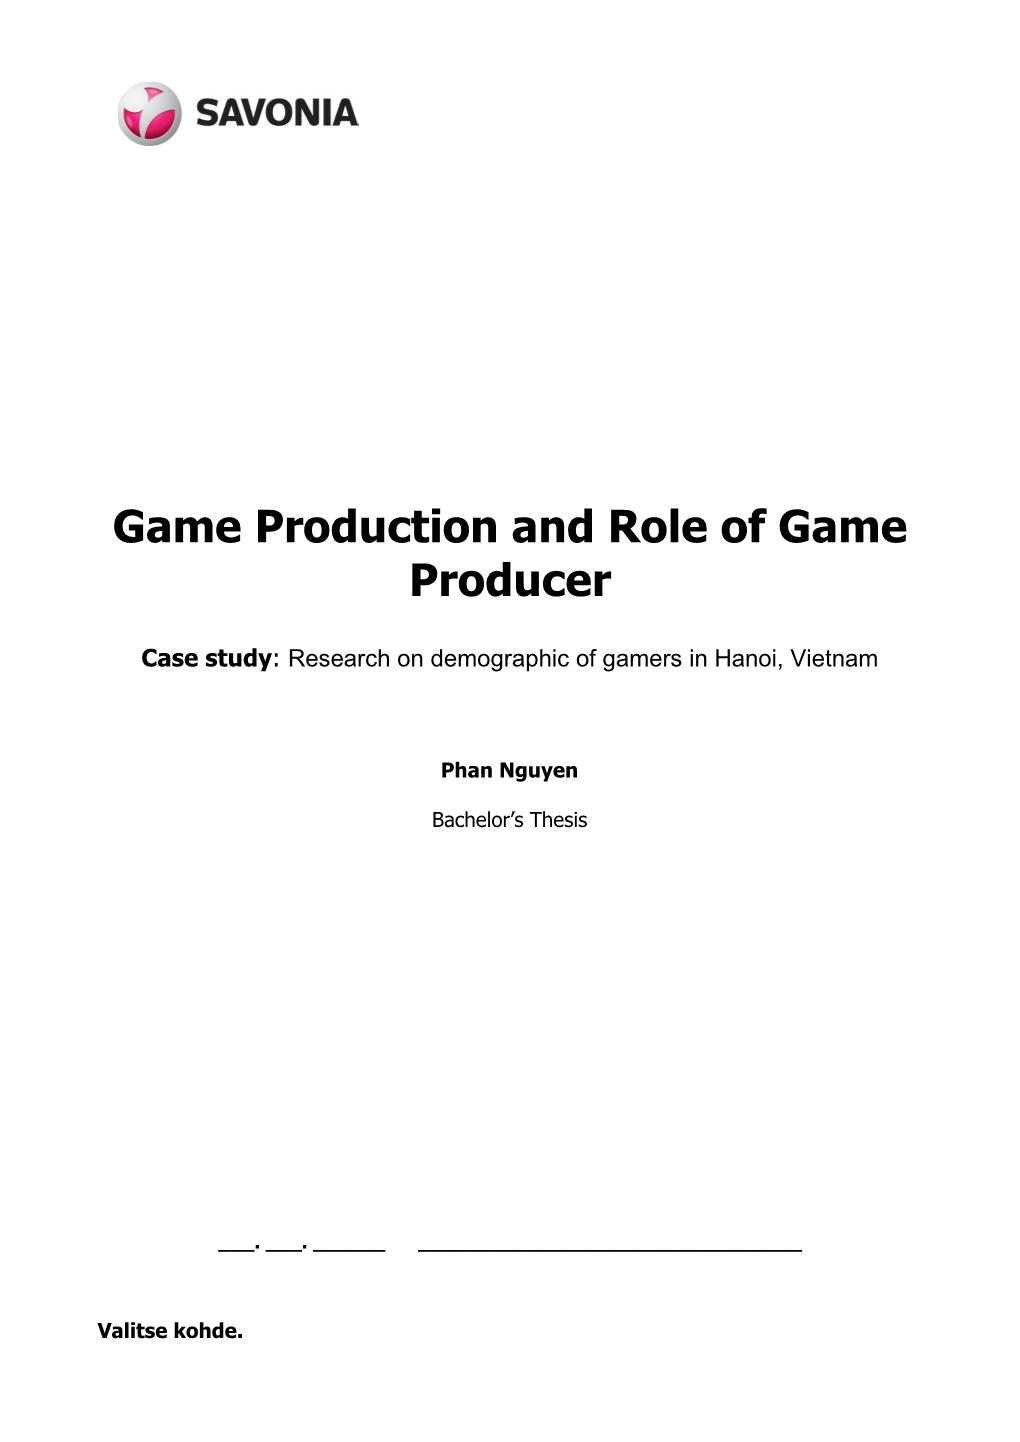 Game Production and Role of Game Producer Date 12/11/2014 Pages/Appendices 43 + 2 Supervisor(S) Leo Suomela